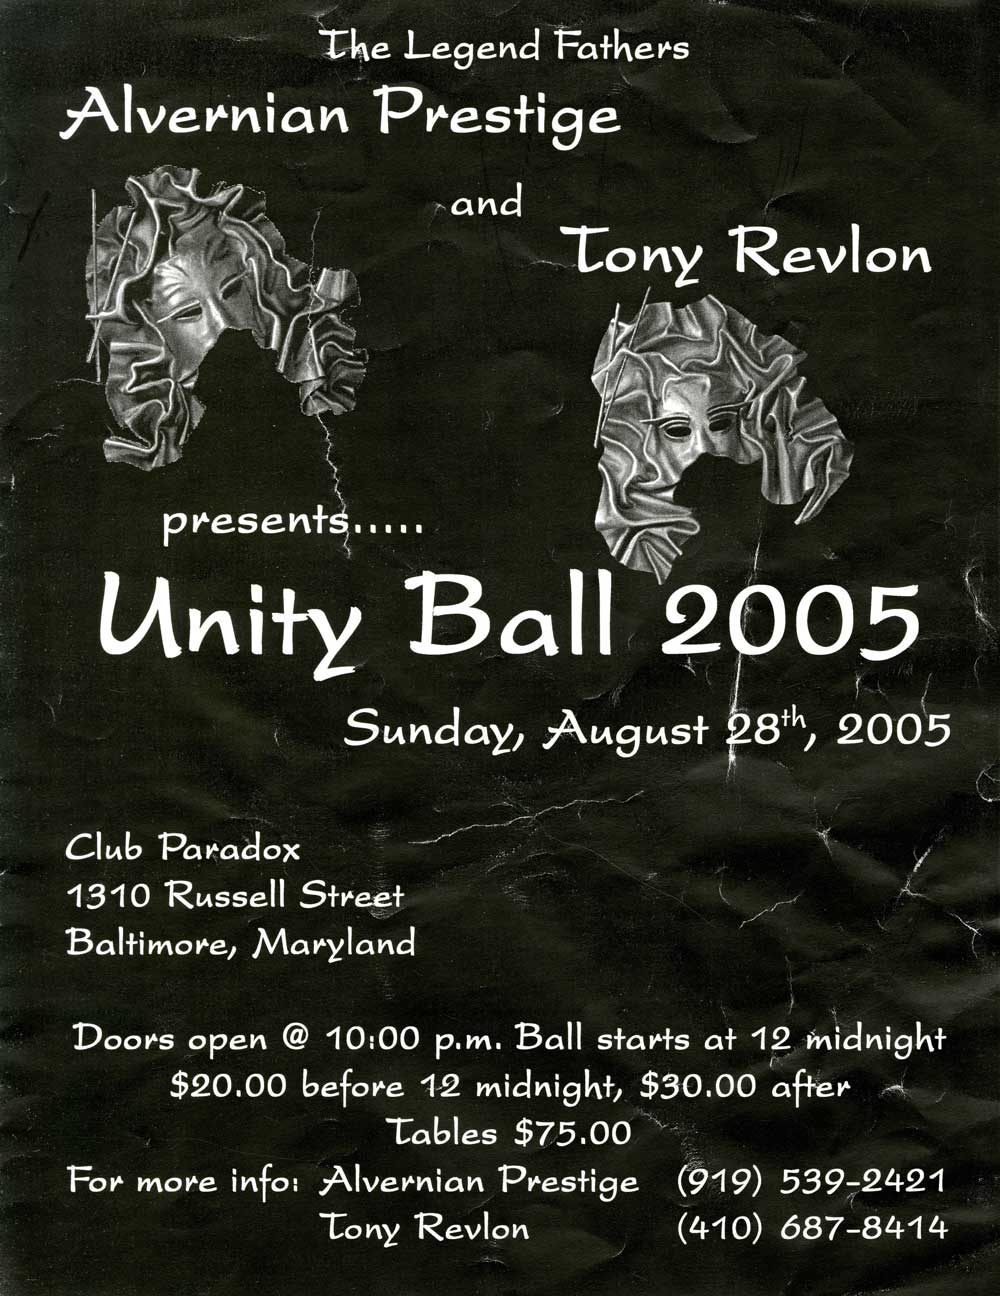 Flyer for an old ball competition